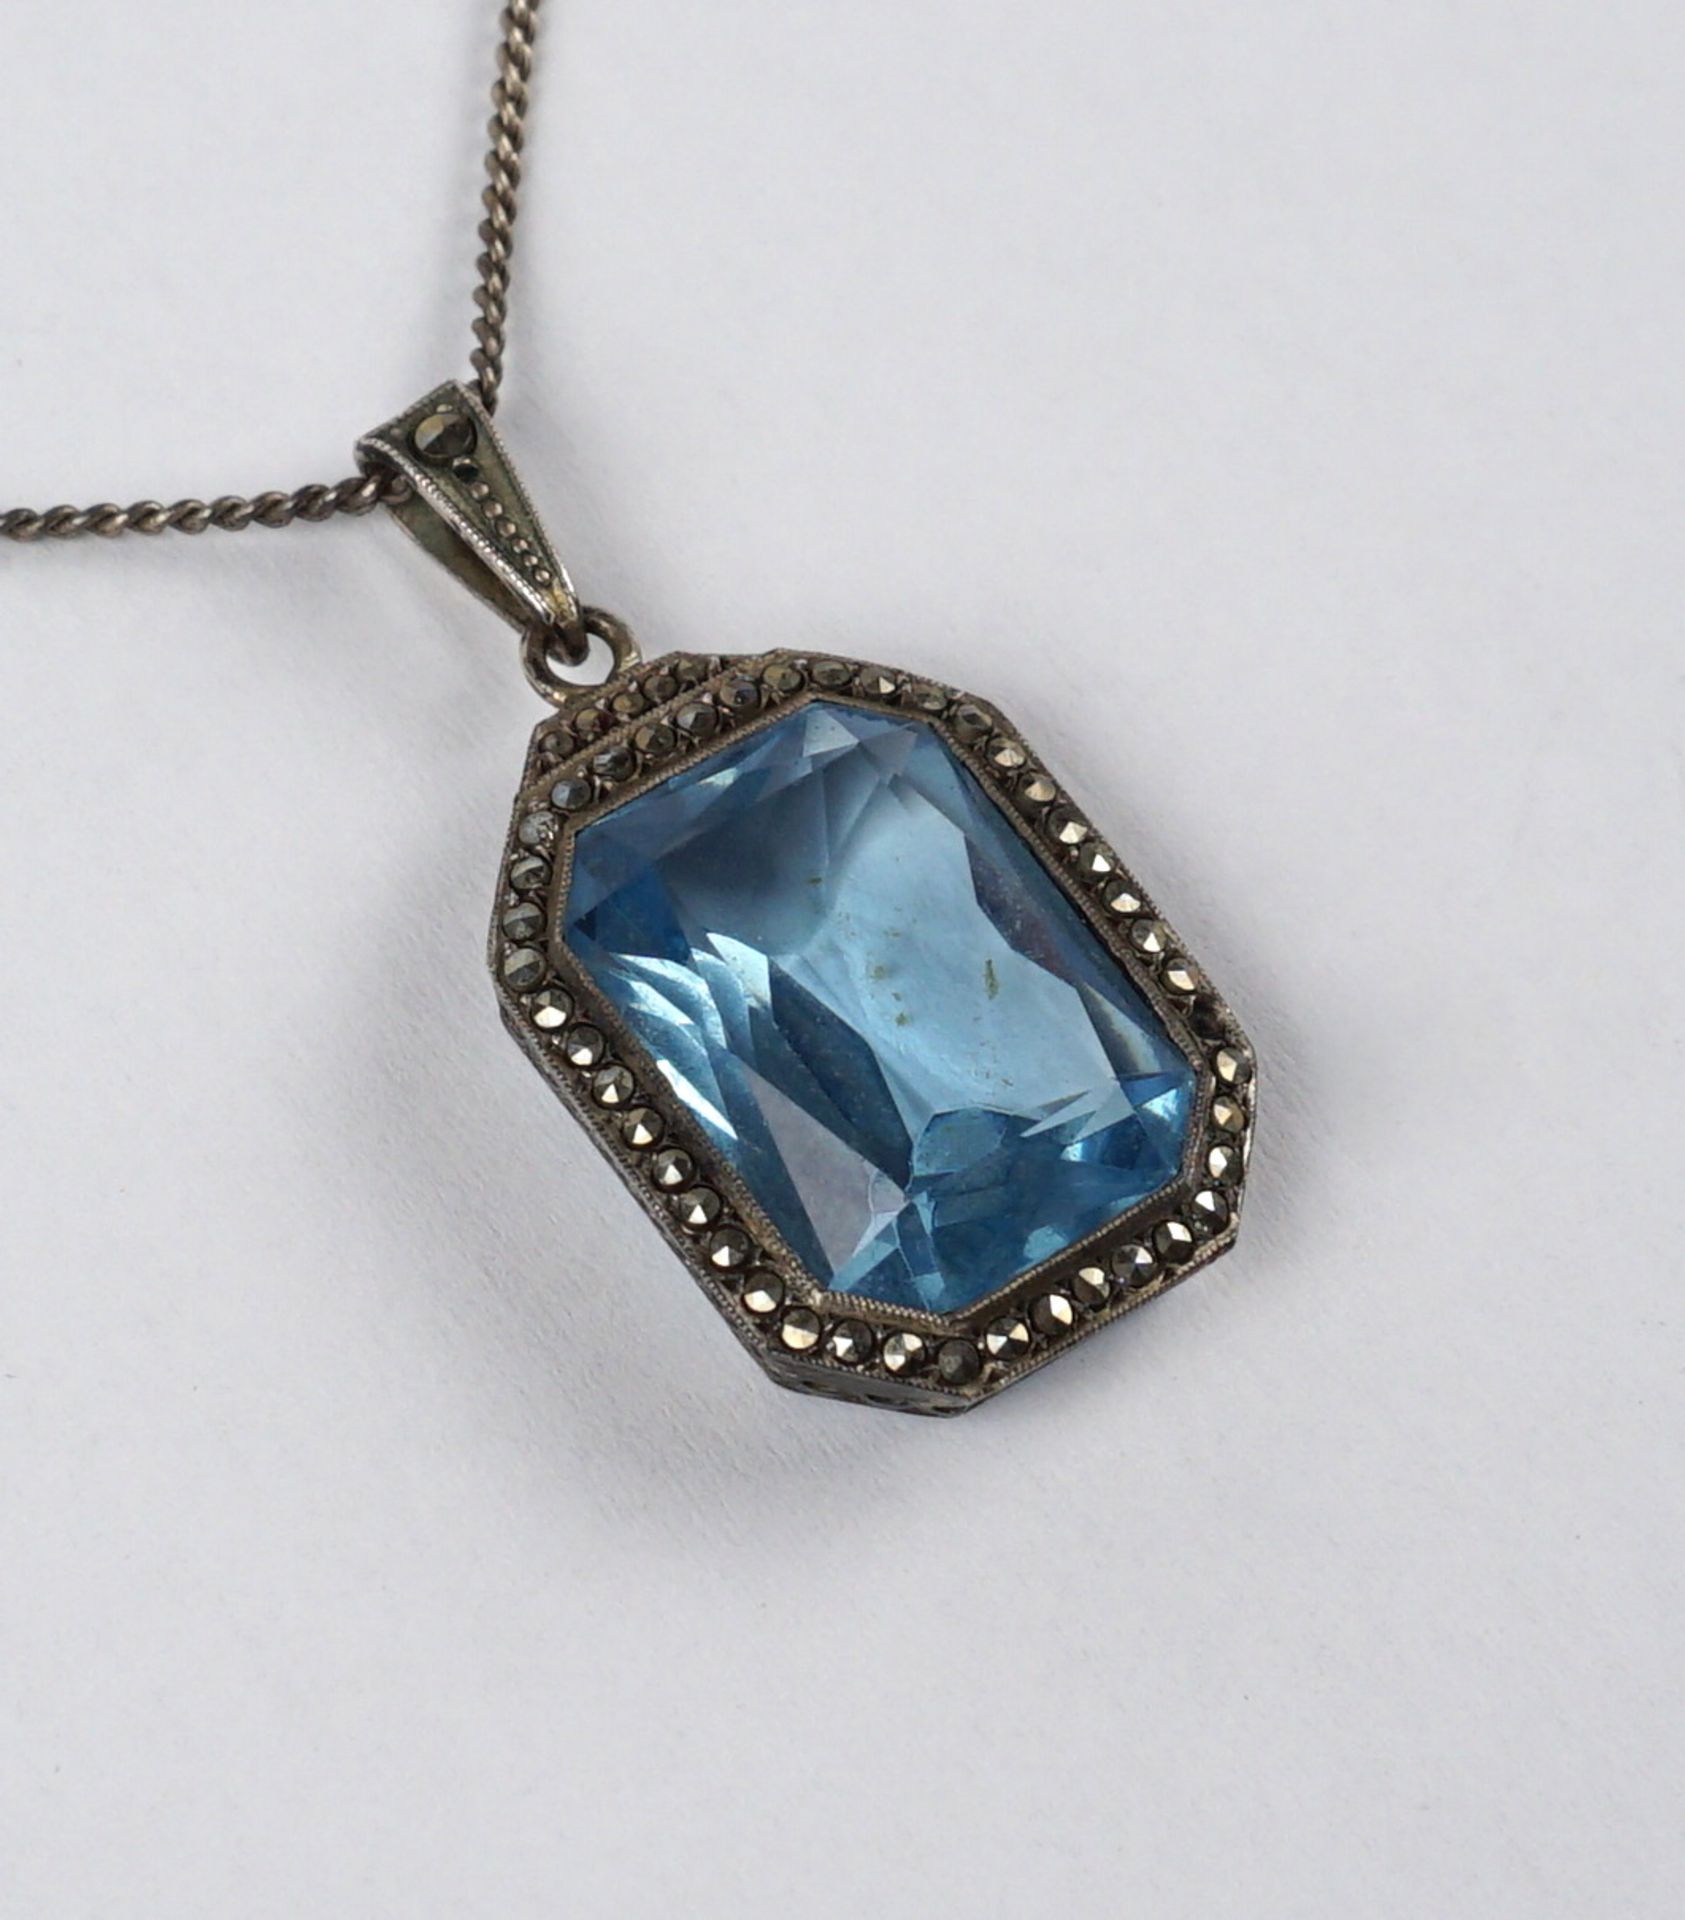 Pendant with aquamarine coloured stone and marcasites on chain, 835 silver, wt.9,96g - Image 2 of 2